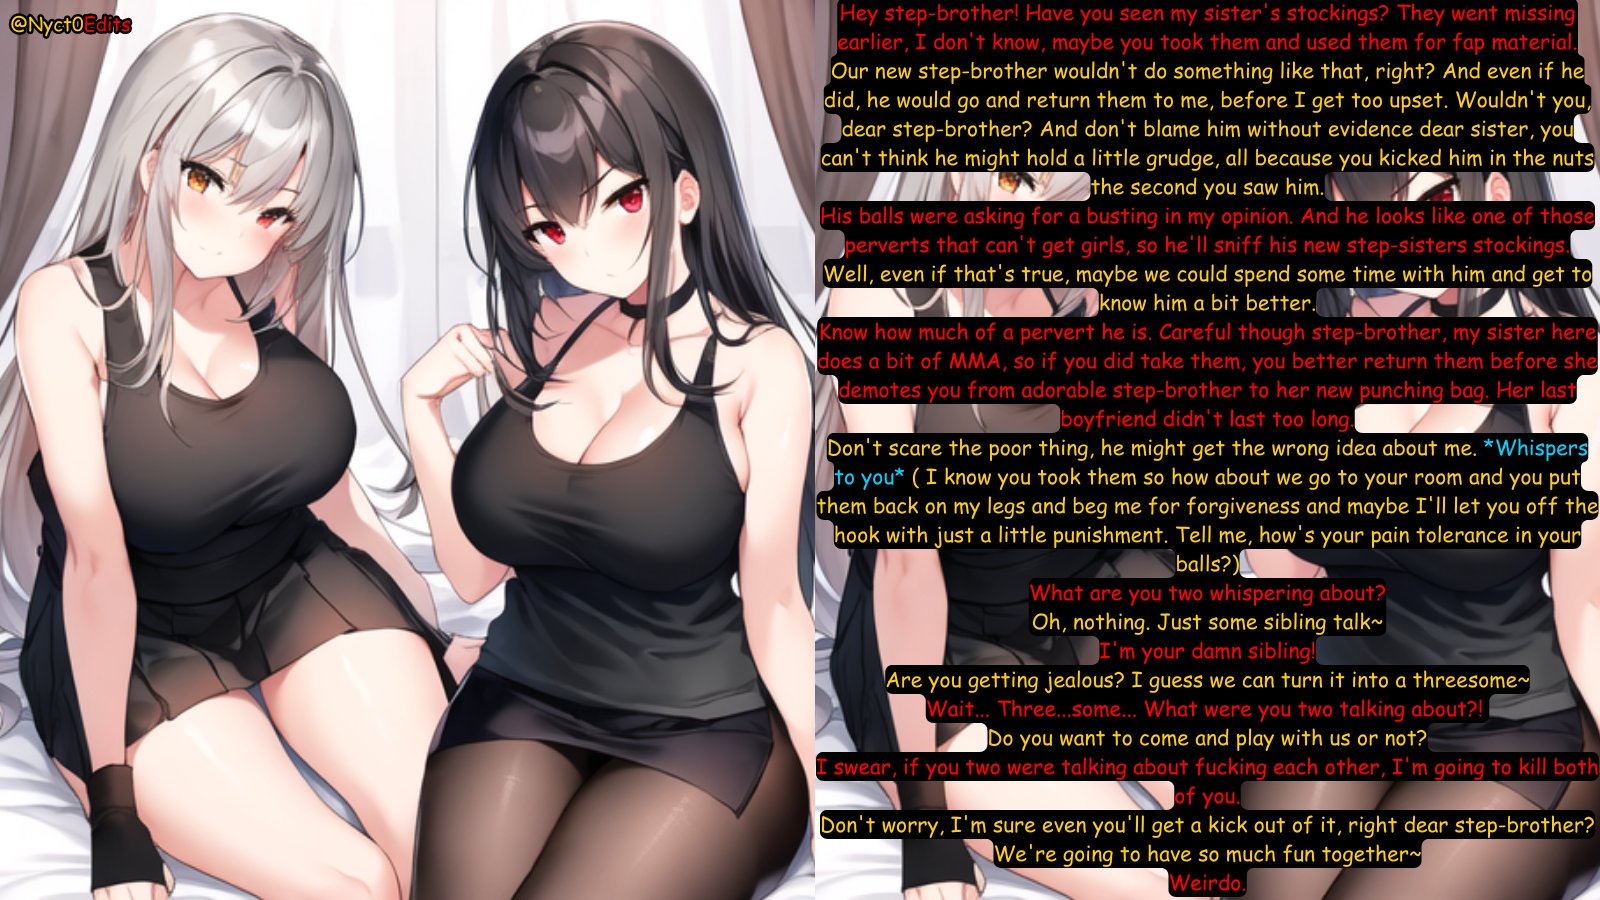 Nyct0 on X: You wouldn't be so much of a hopeless pervert that you'd use  your own step-sisters stockings as fap material, right? #Hentai #Waifu # Ballbusting #CBT #Ballkick #Ballbustingcaption #Ballbustingsisters  t.coRA35whNNWV 